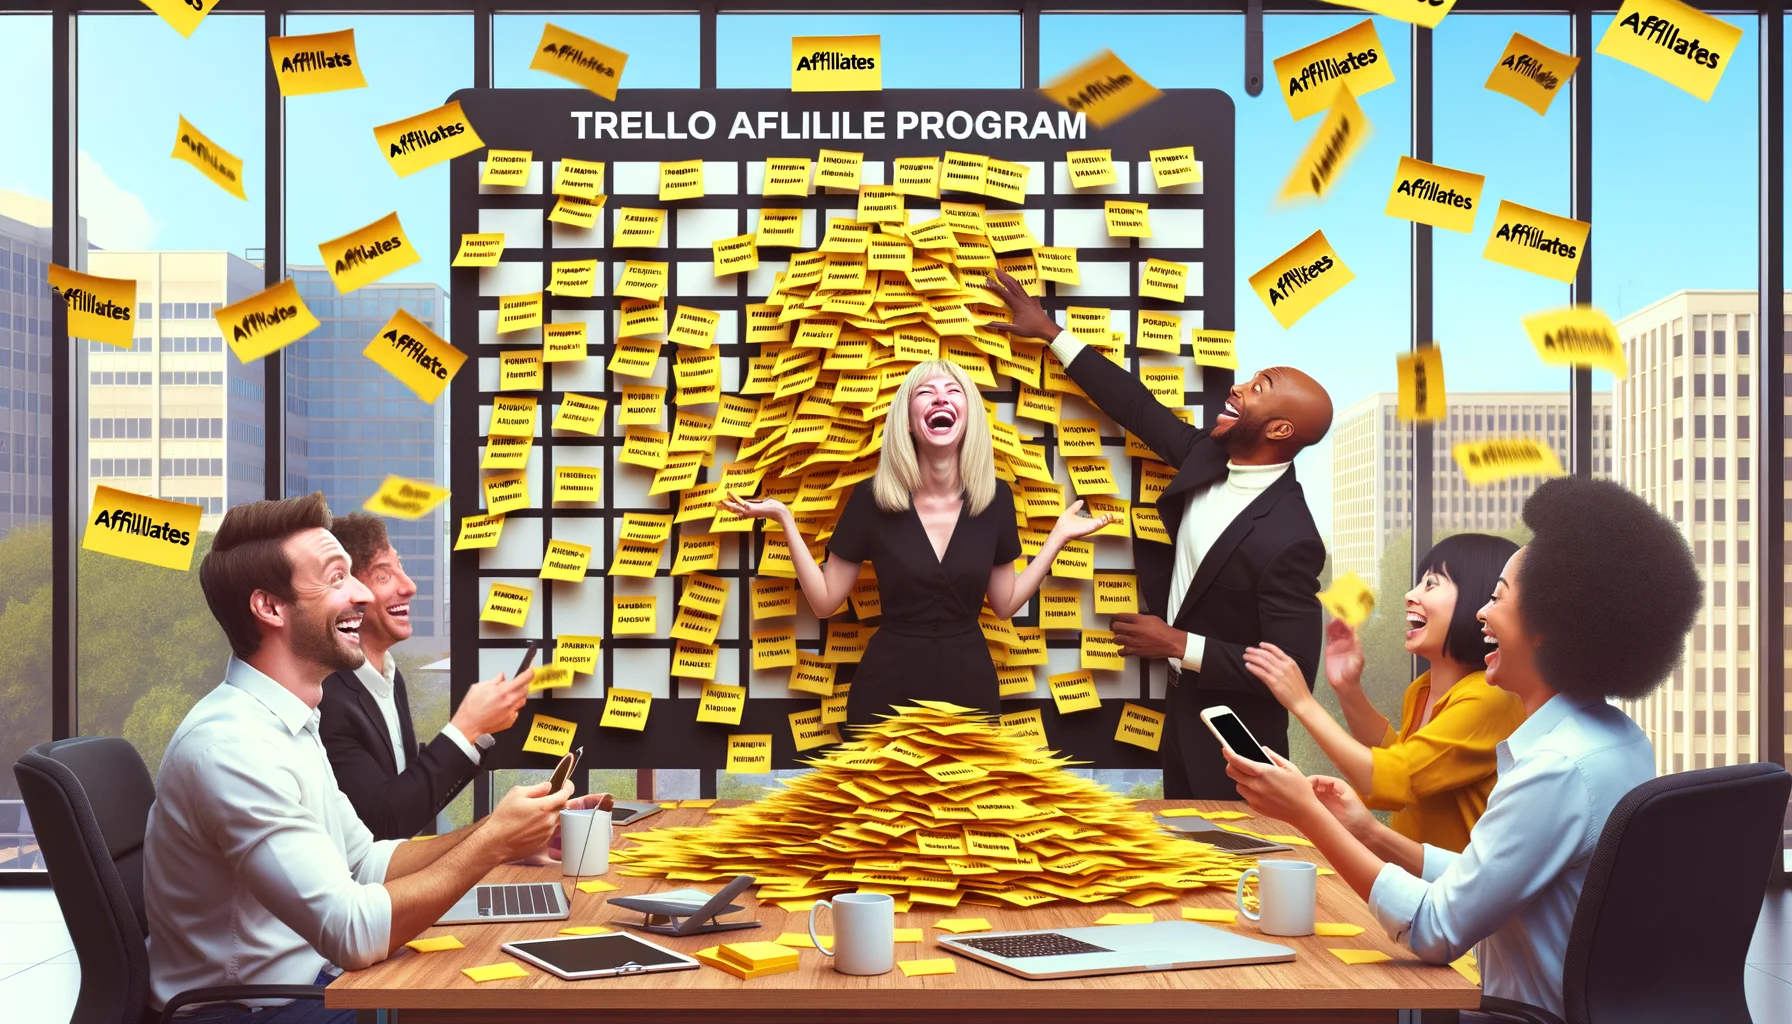 Generate a playful yet realistic image featuring a humorous scenario related to the Trello Affiliate Program. Picture the scene in a bustling office space where a diverse team of employees is collaborating. A Caucasian woman with blonde hair is laughing while trying to organize heaps of yellow sticky notes on a giant, physical Trello board on the office wall. A Black man is seen tossing up more of these sticky notes that say 'affiliates', causing more laughter in the room. Meanwhile, a Middle Eastern man is hilariously attempting to scan the physical Trello board with his smartphone.